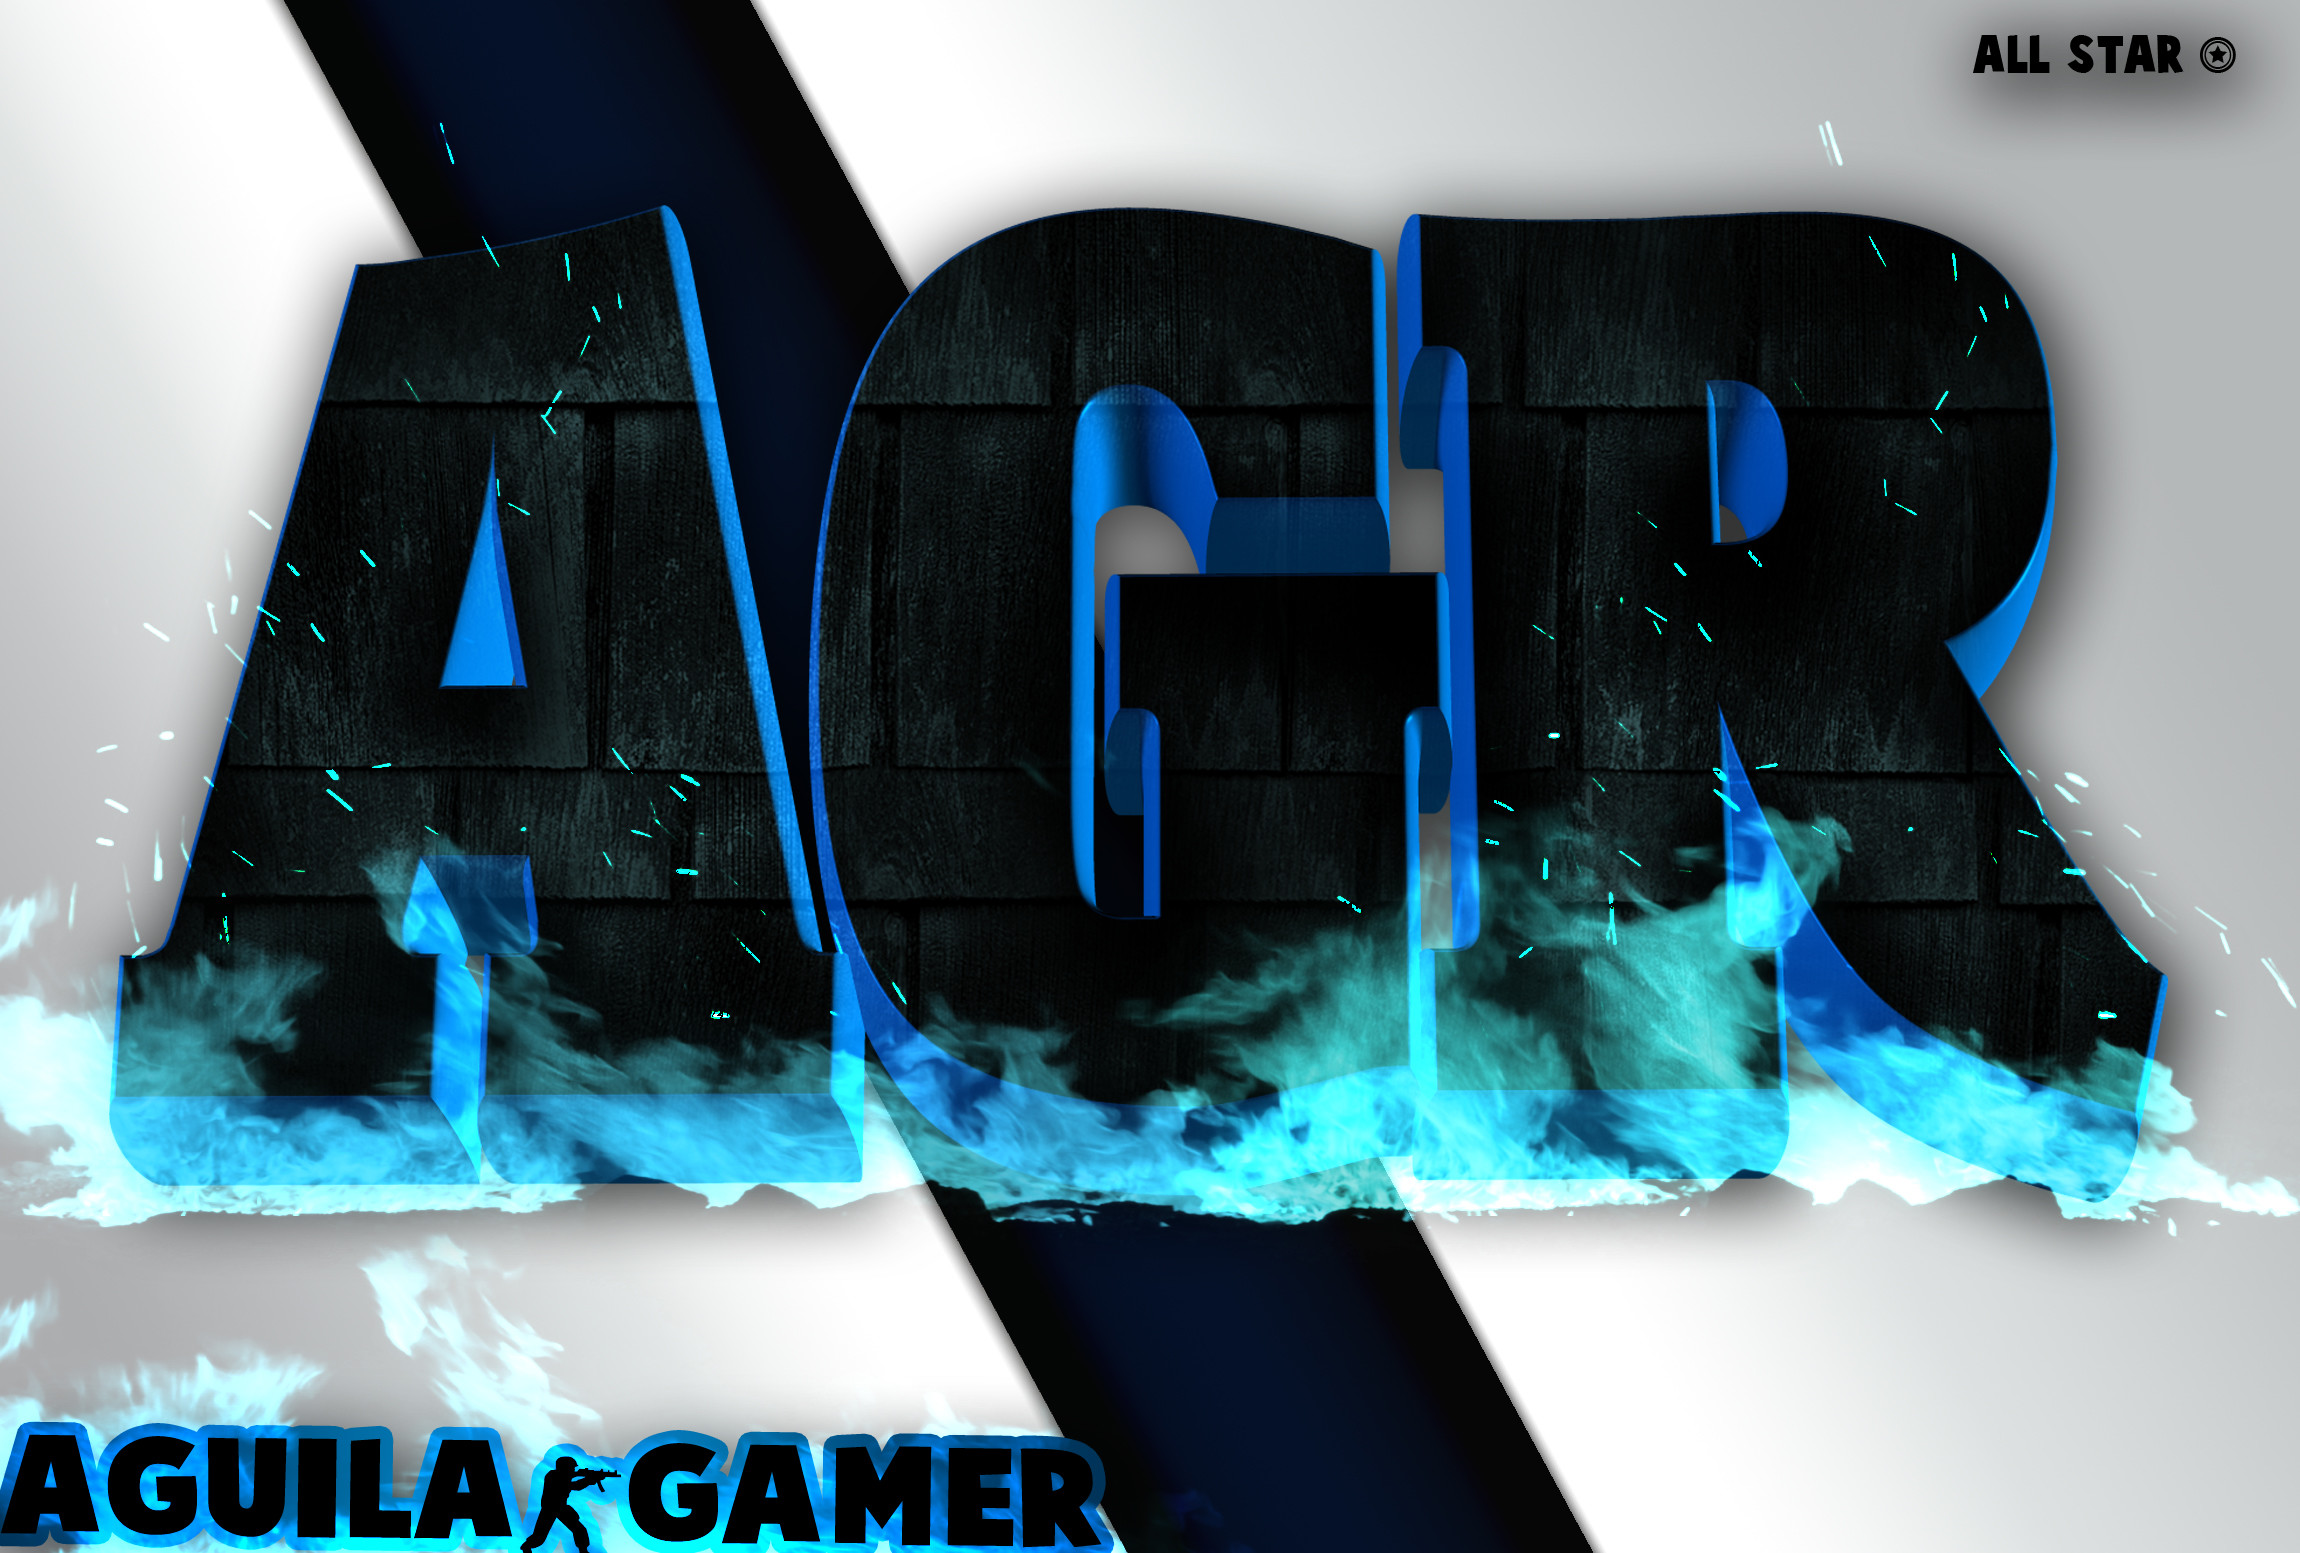 Blue fire AGR logo / wallpaper by Thepedro0403